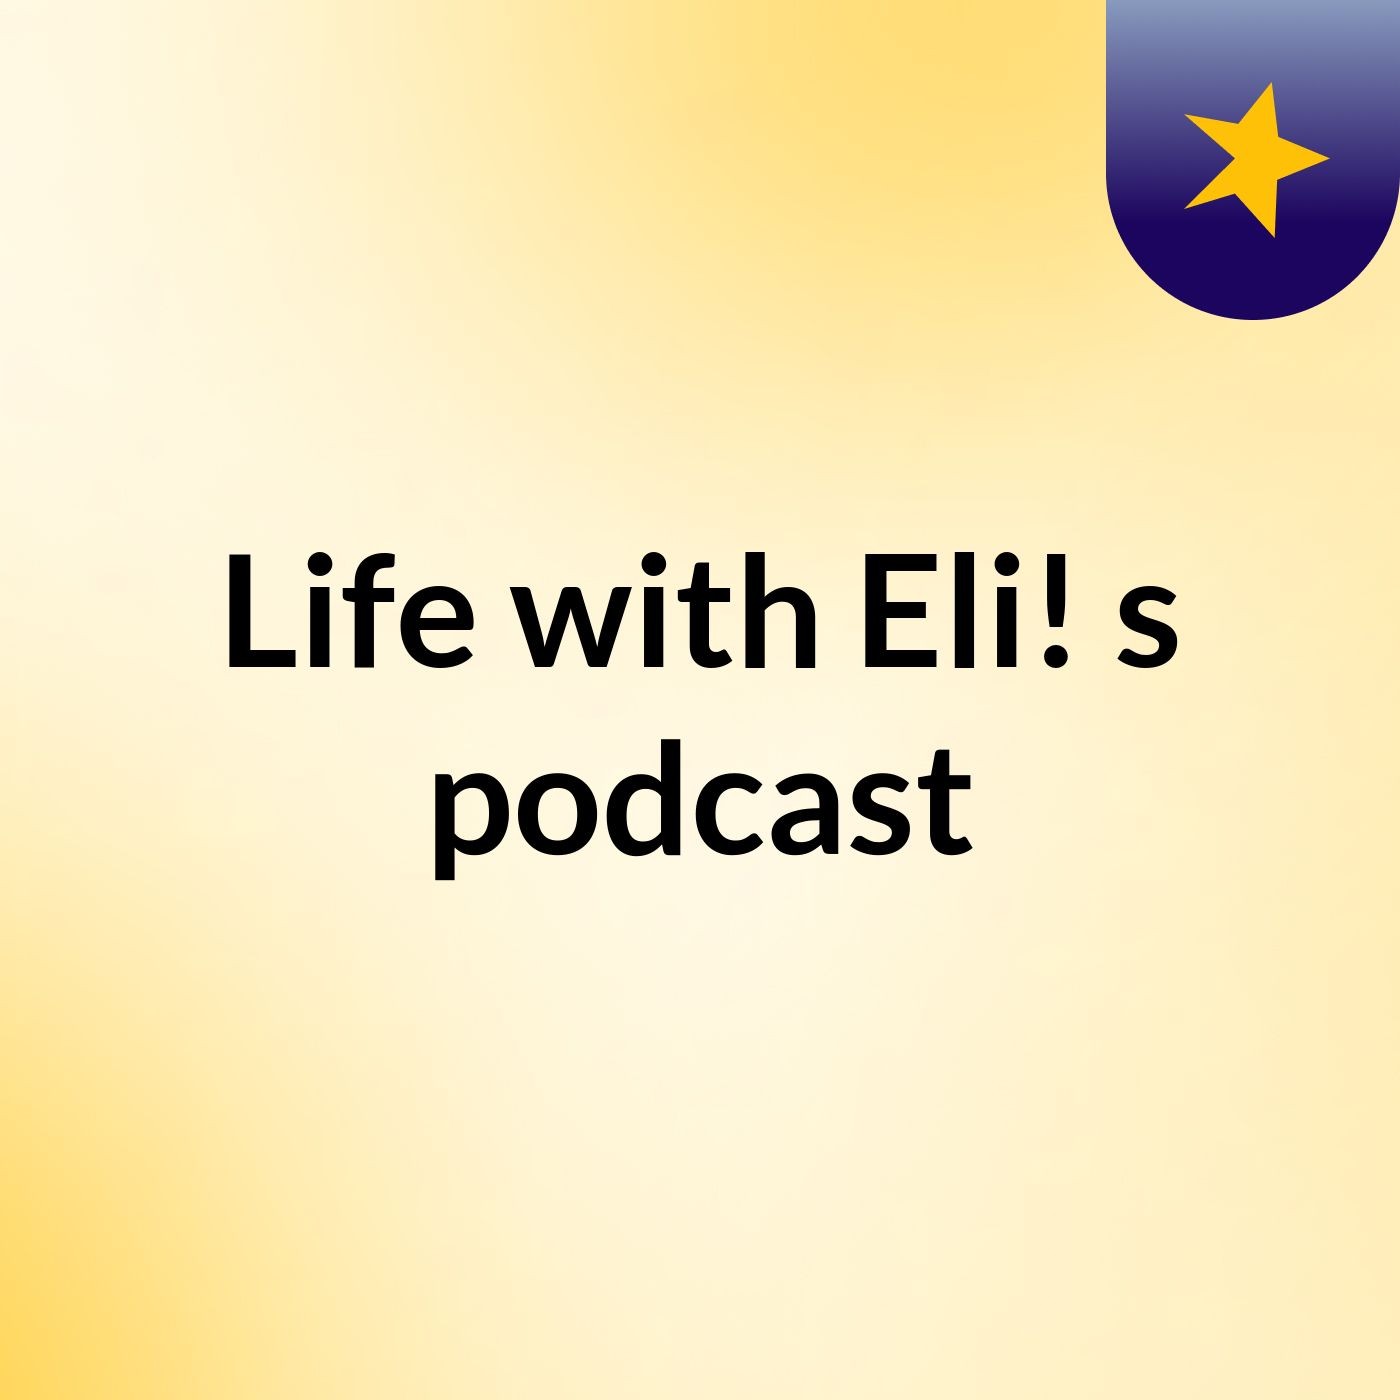 Life with Eli!'s podcast